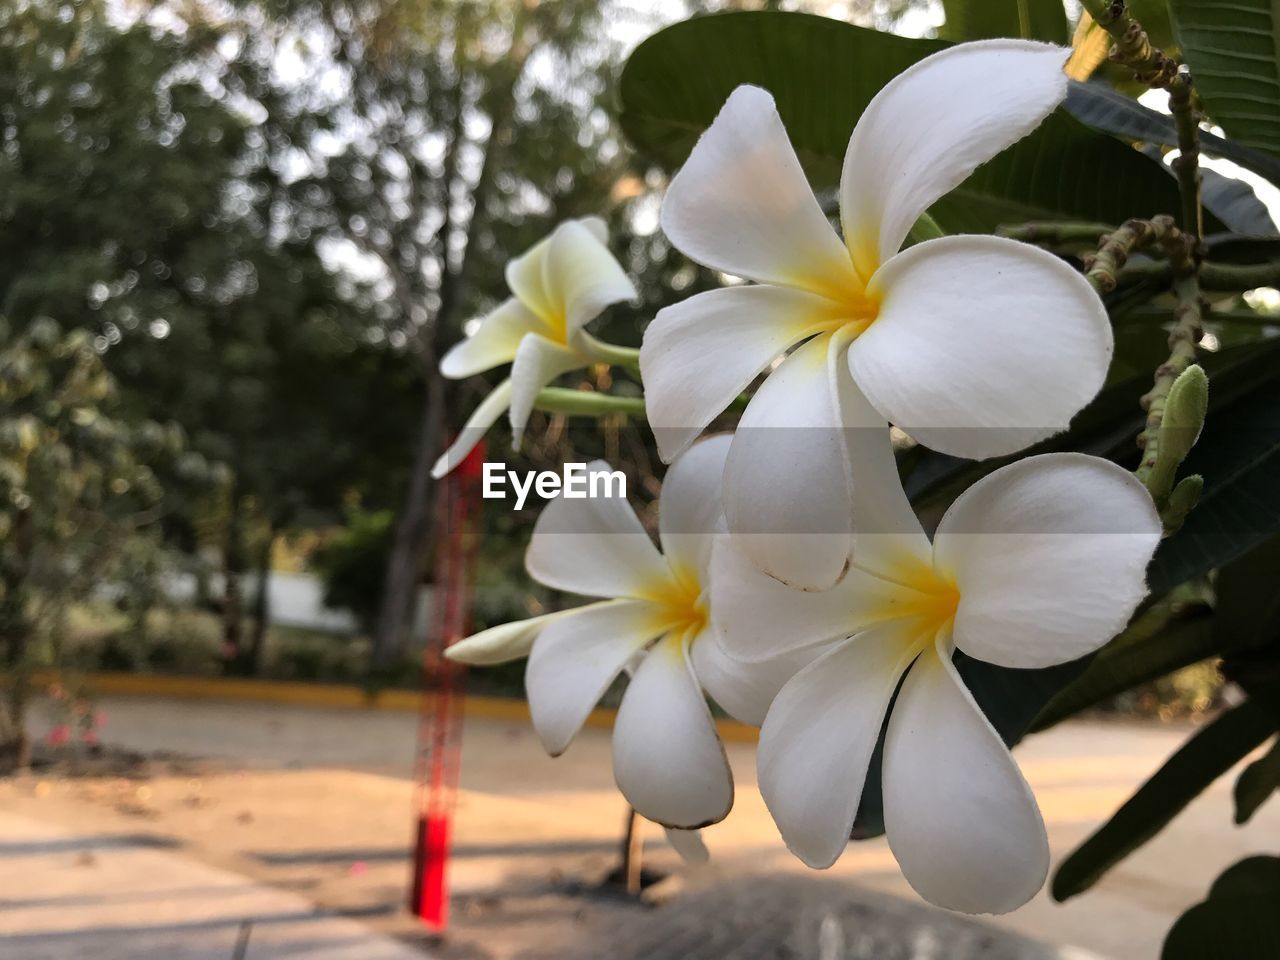 CLOSE-UP OF FRANGIPANI FLOWERS BLOOMING OUTDOORS